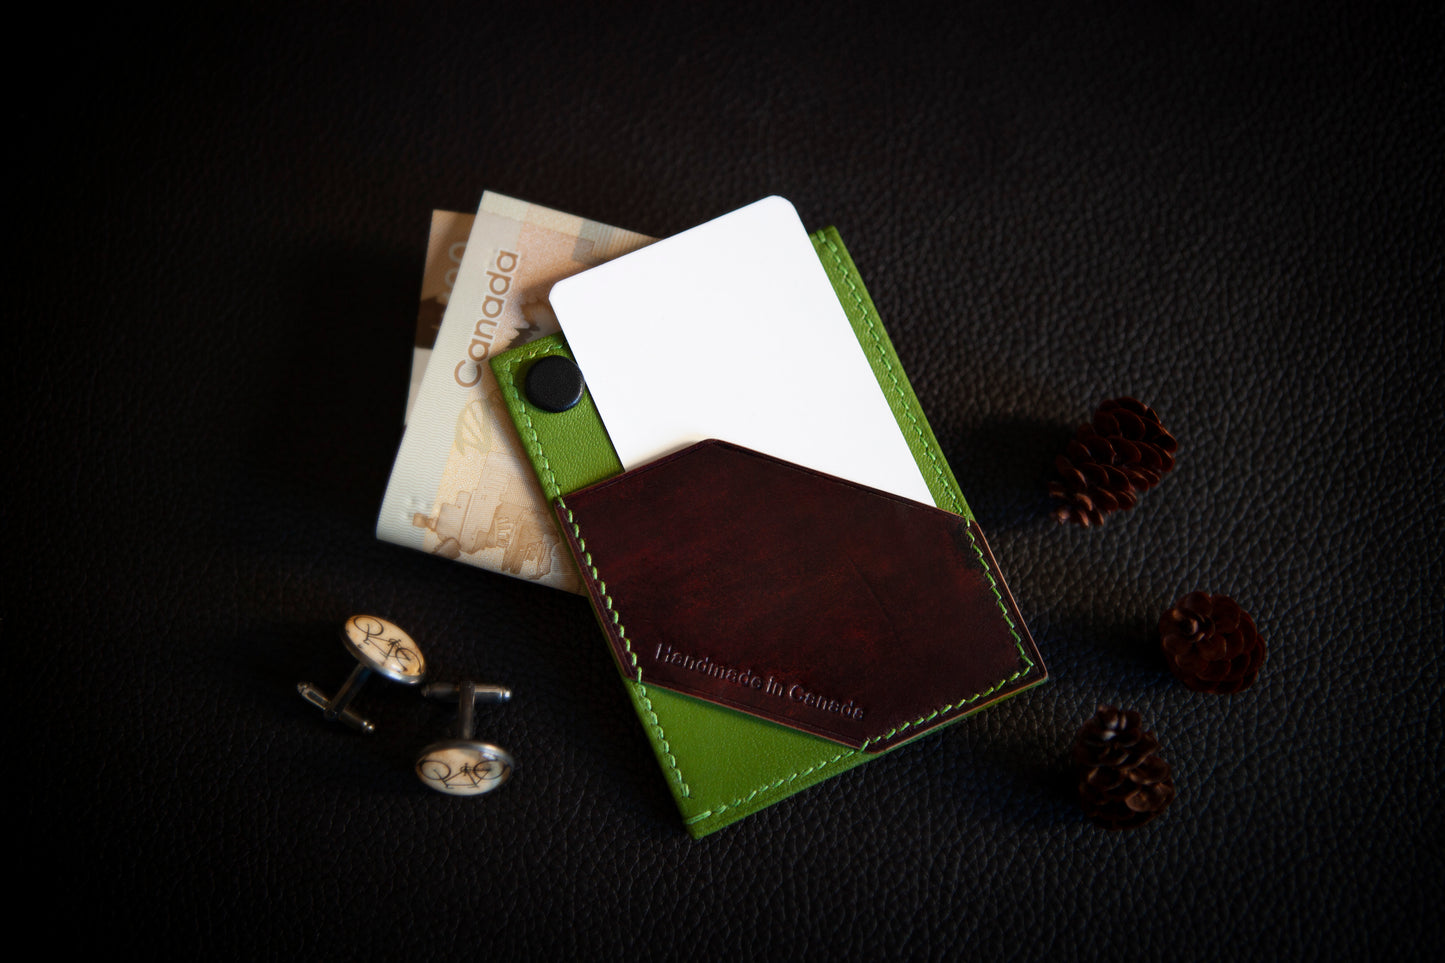 The Patrician card holder in Olive green